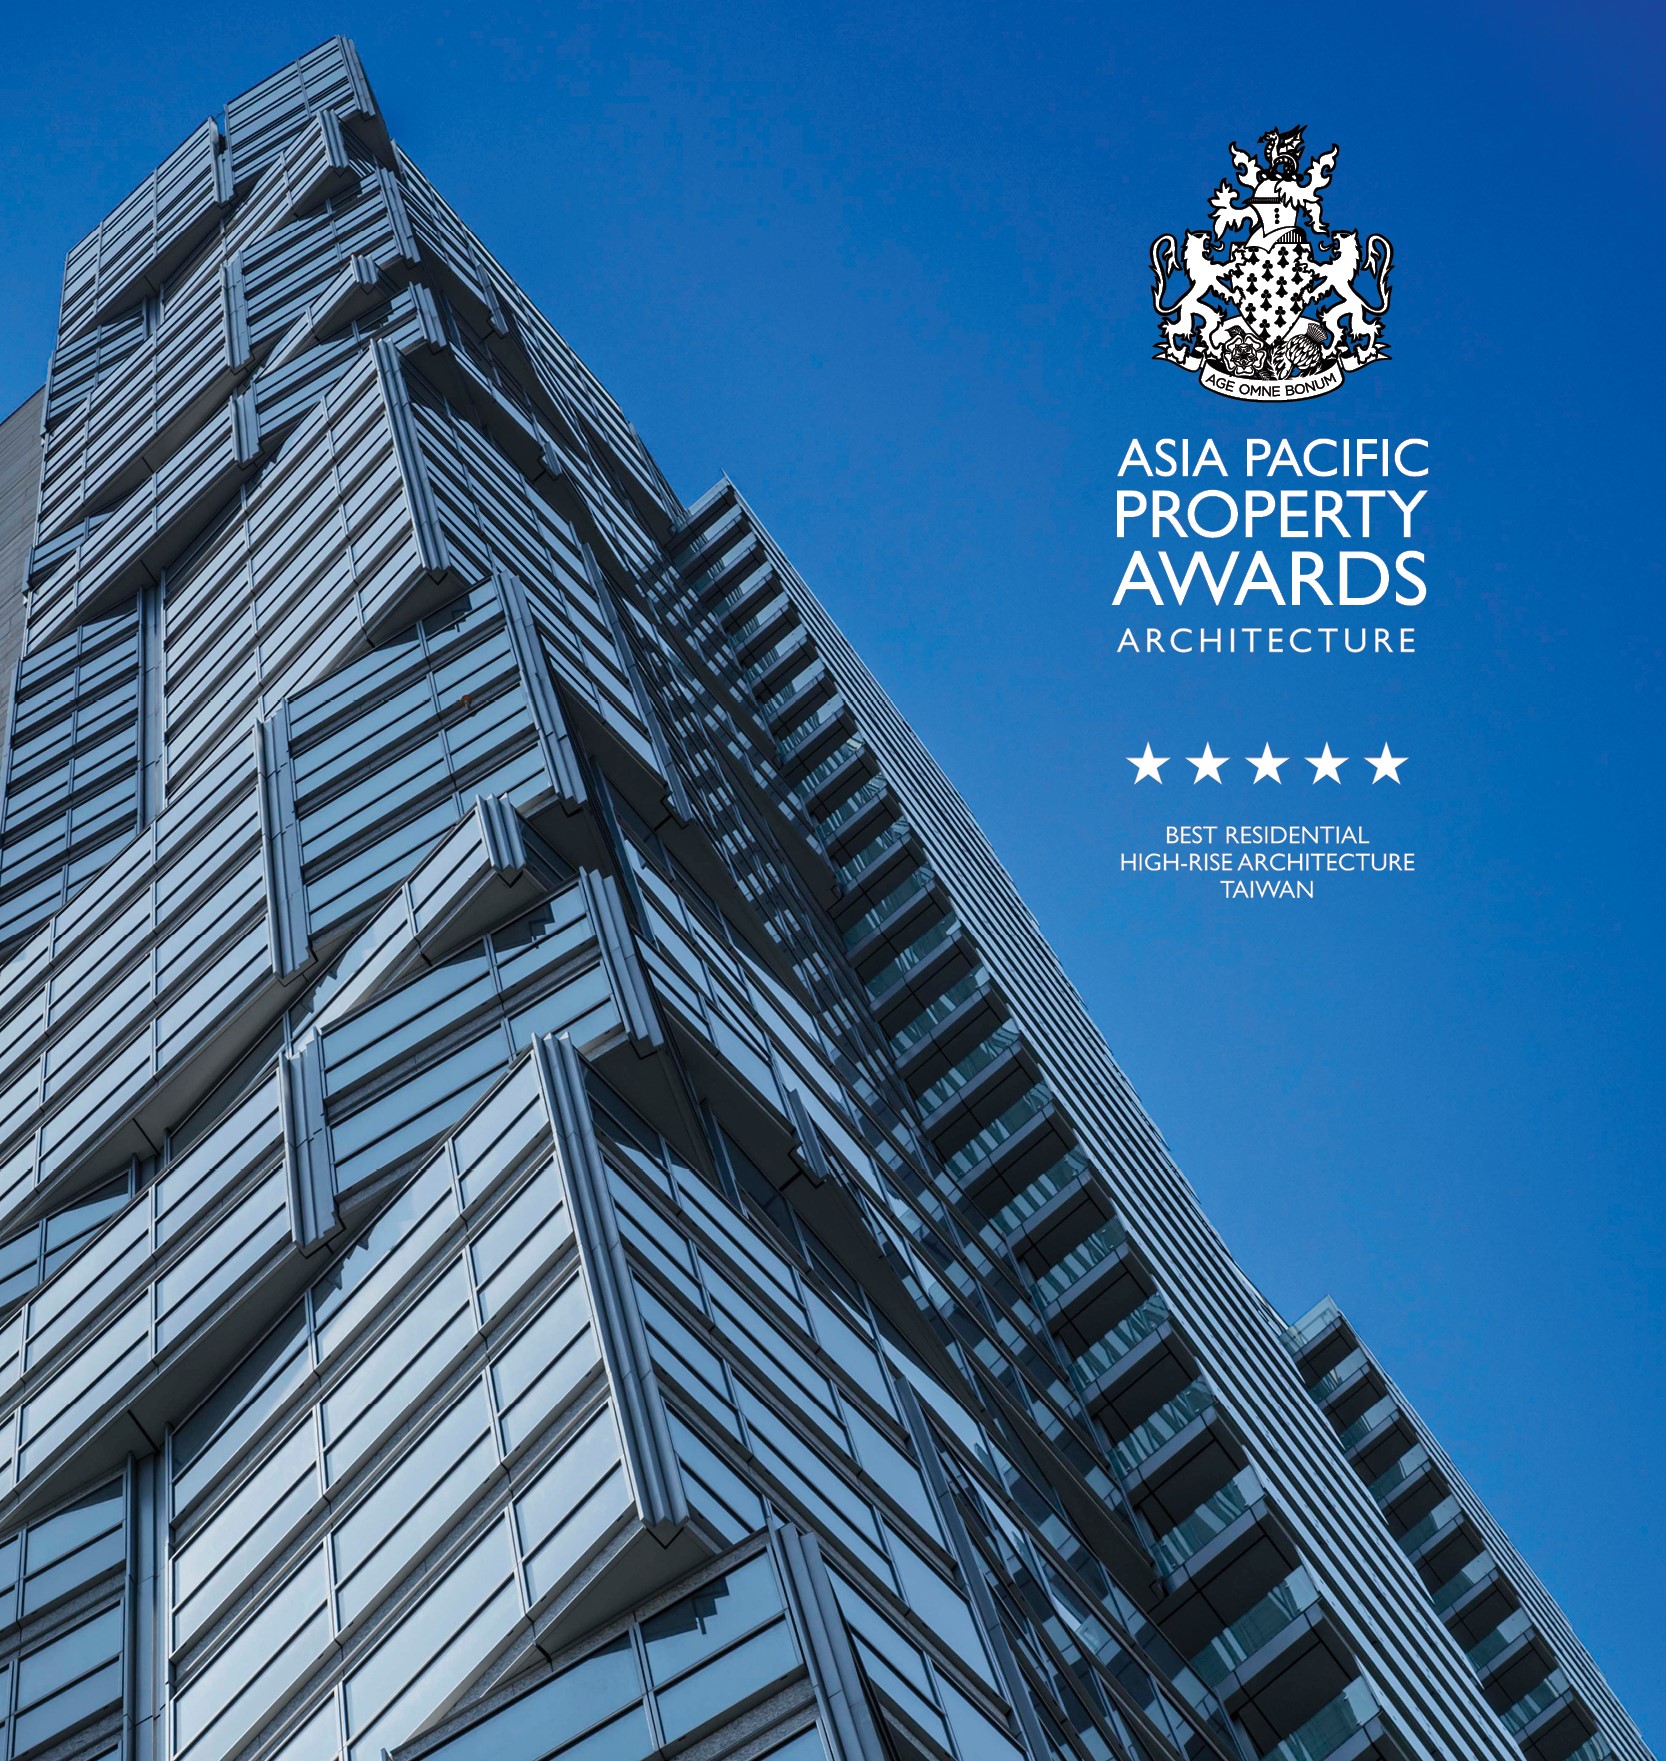 Luxury Residential Tower wins International Property Awards